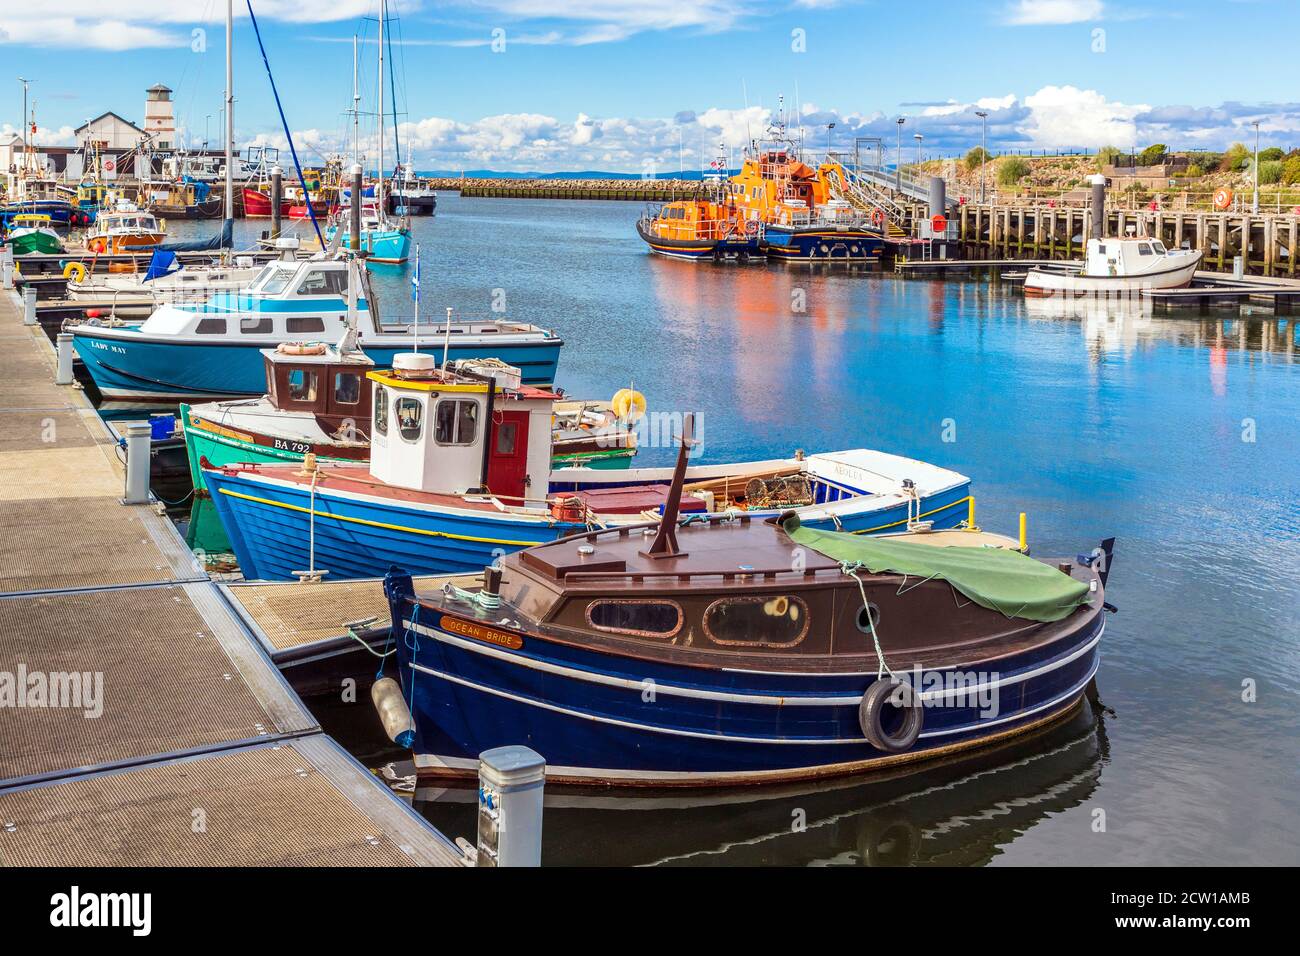 General view of Girvan harbour, Ayrshire Scotland showing small fishing boats and private boats and lifeboats, UK on the Firth of Clyde Stock Photo